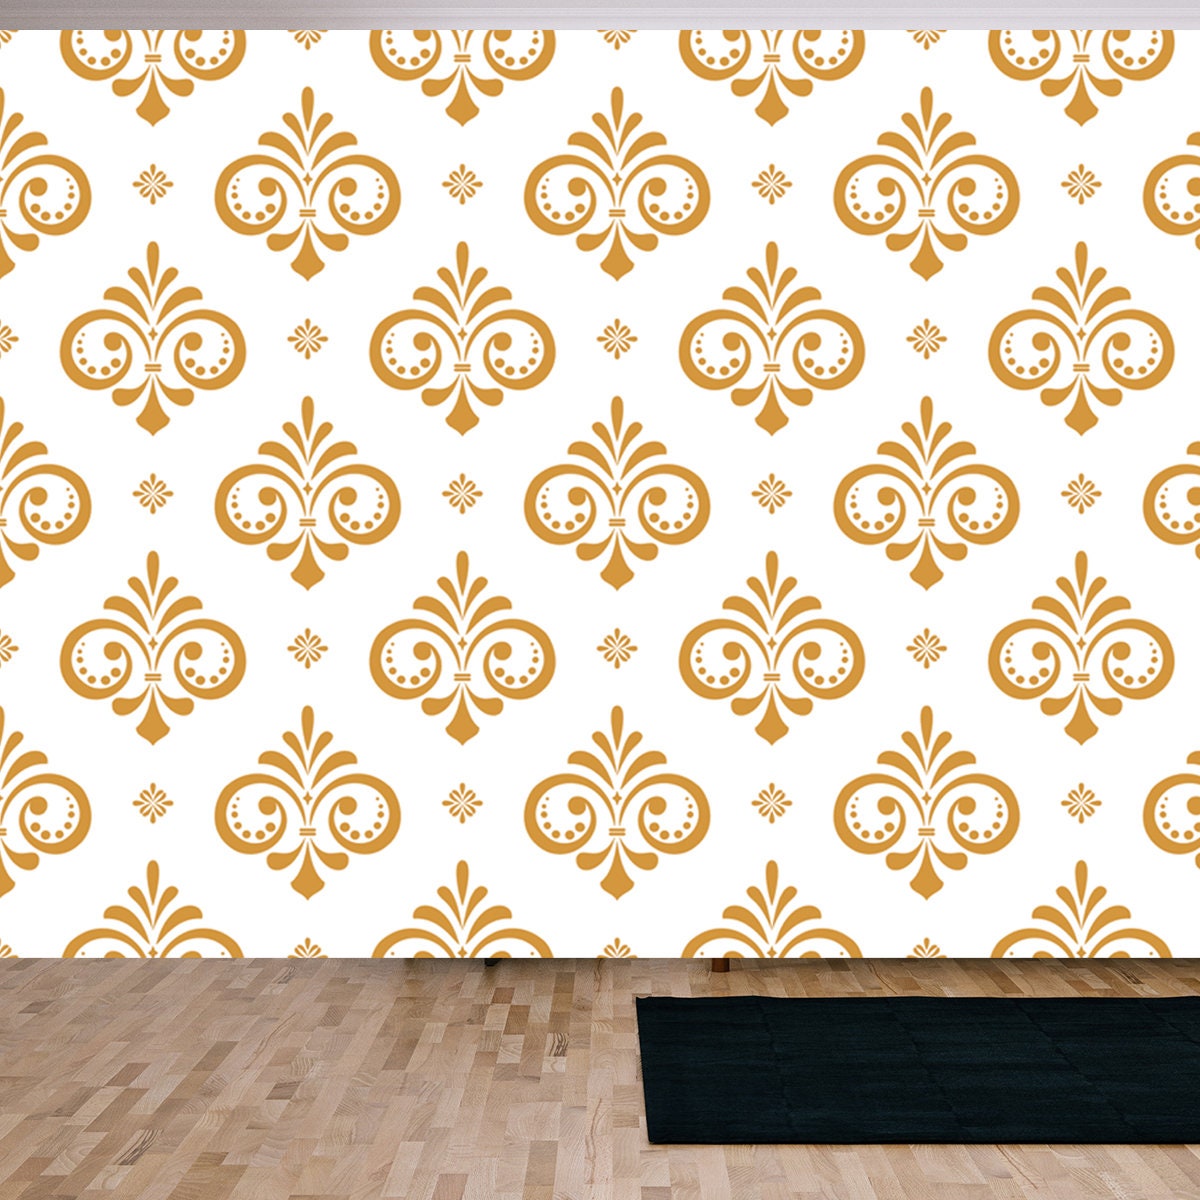 Wallpaper in the Style of Baroque. Seamless Vector Background. White and Gold Floral Ornament Wallpaper Living Room Mural